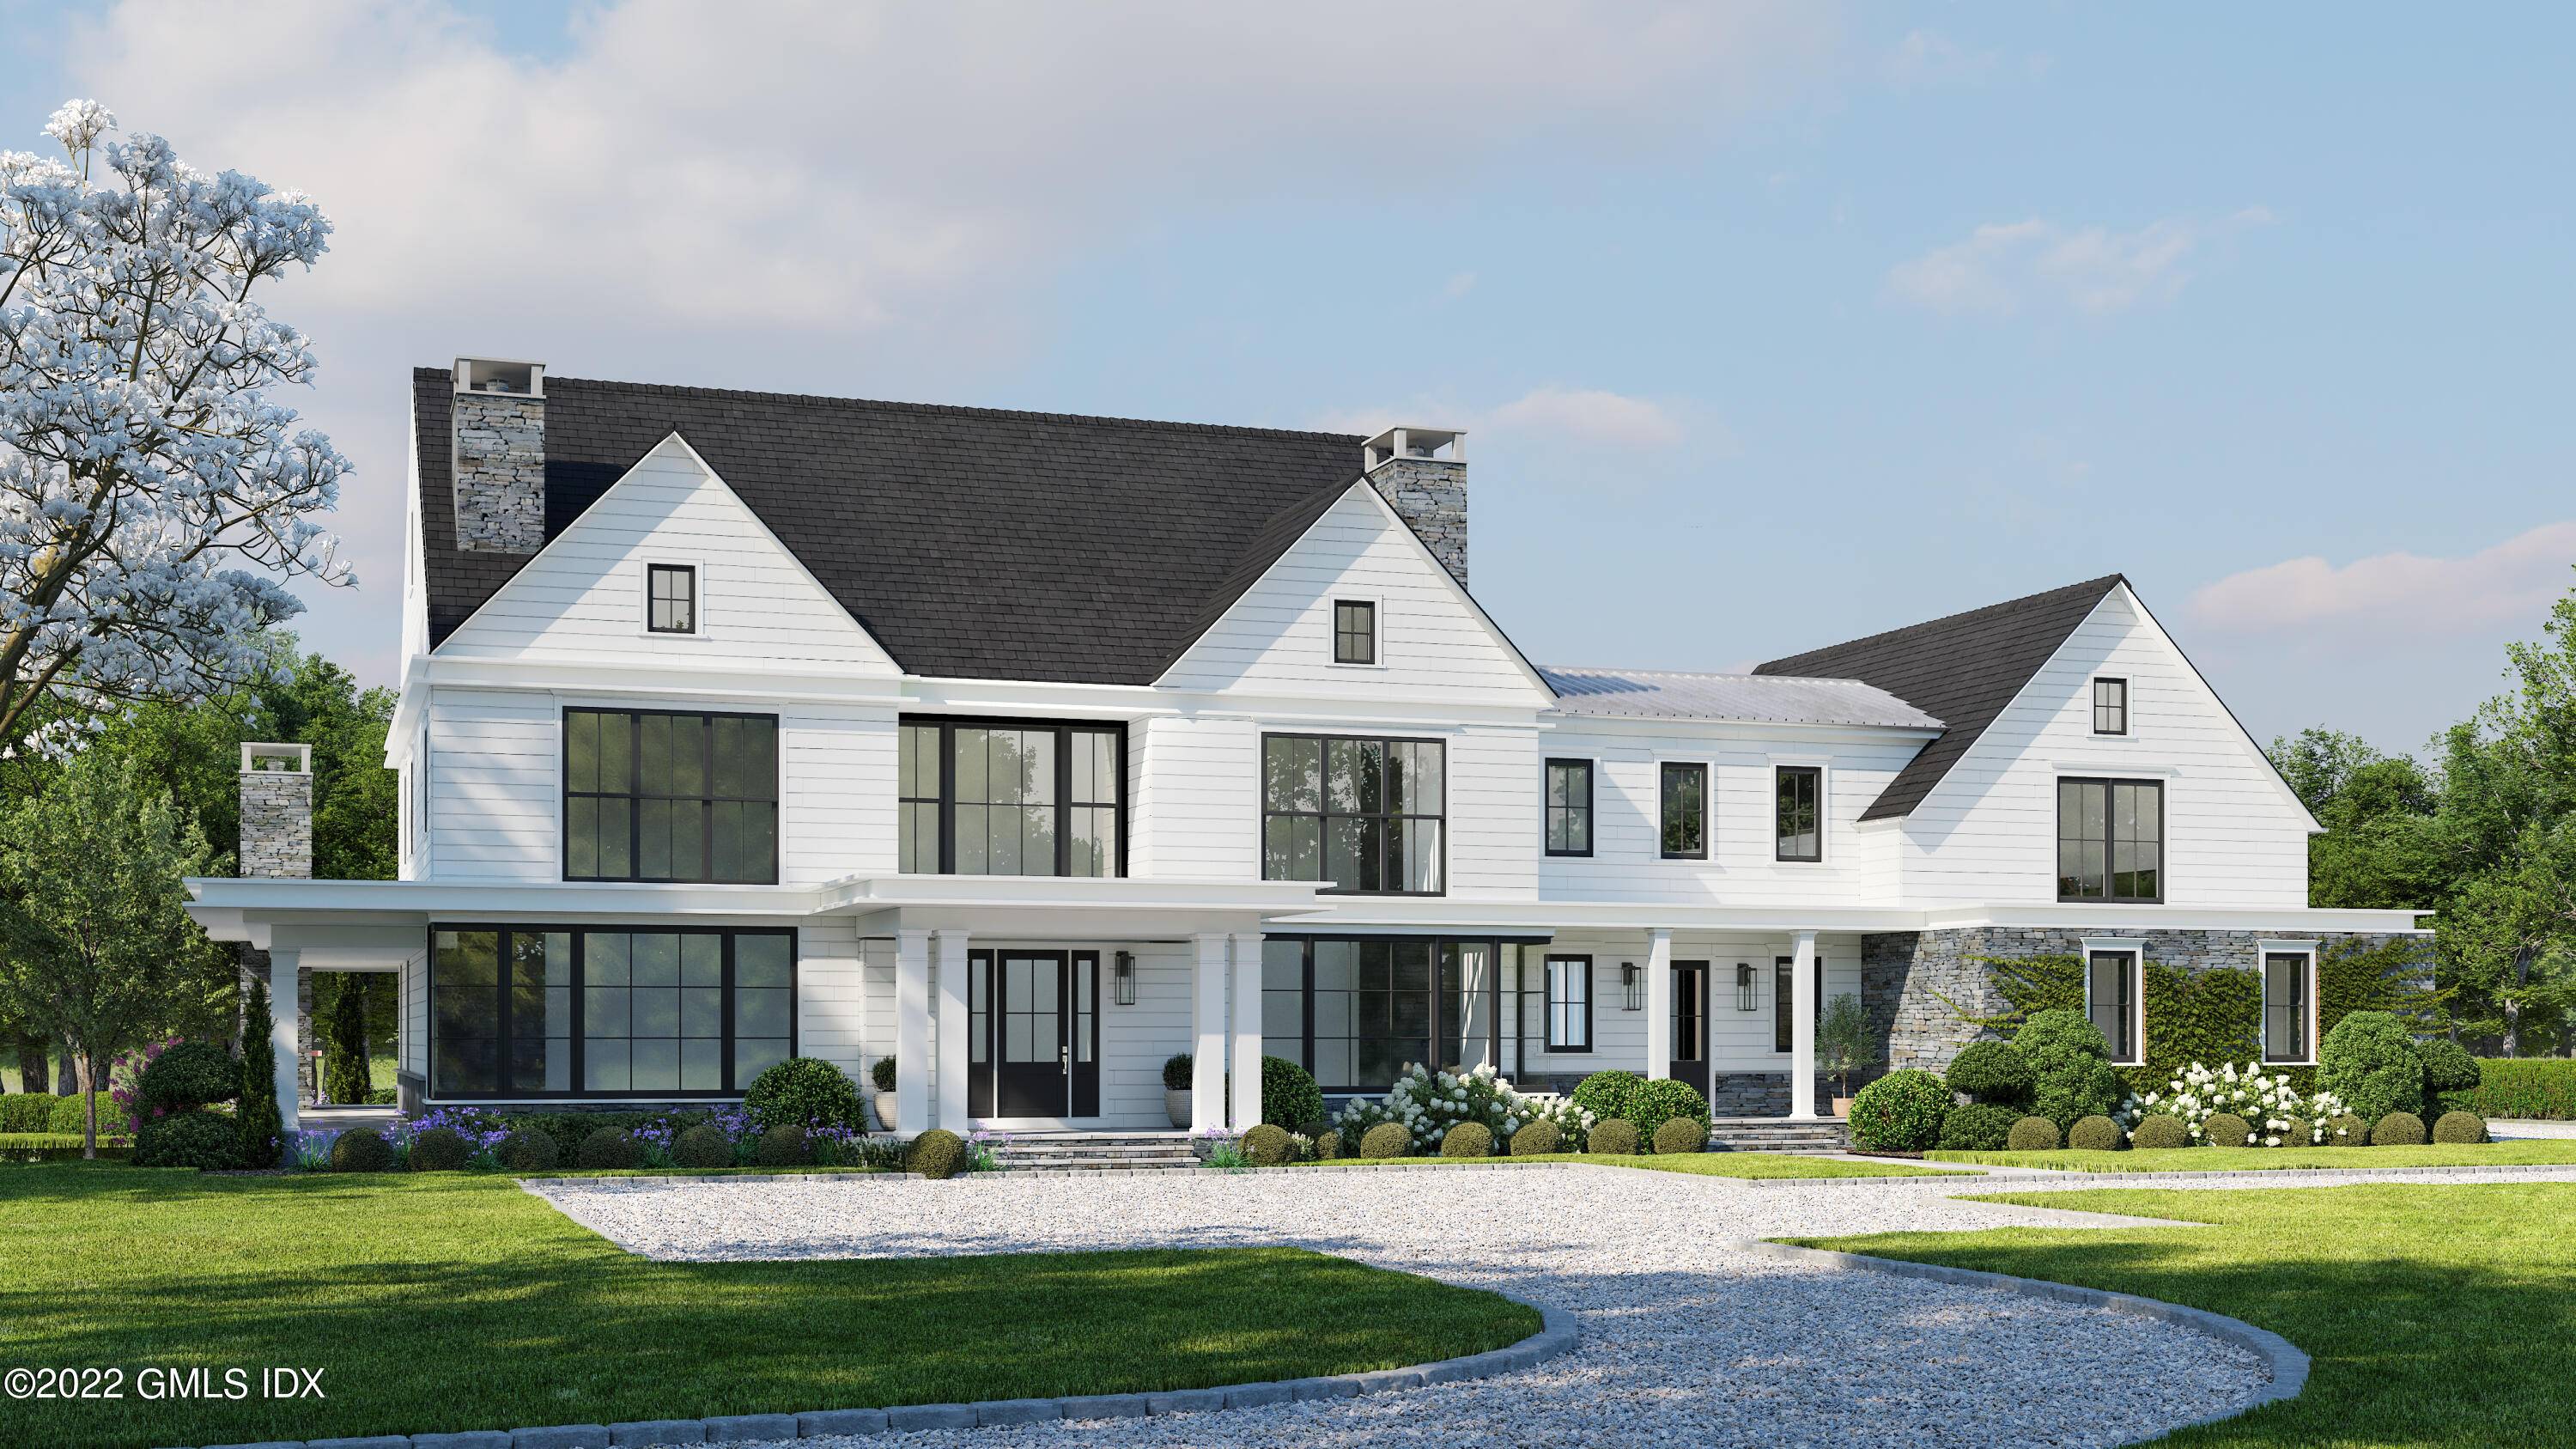 Experience the best of the Greenwich lifestyle from this New Construction, Ultra stylish Modern colonial by Hawthorne Development.